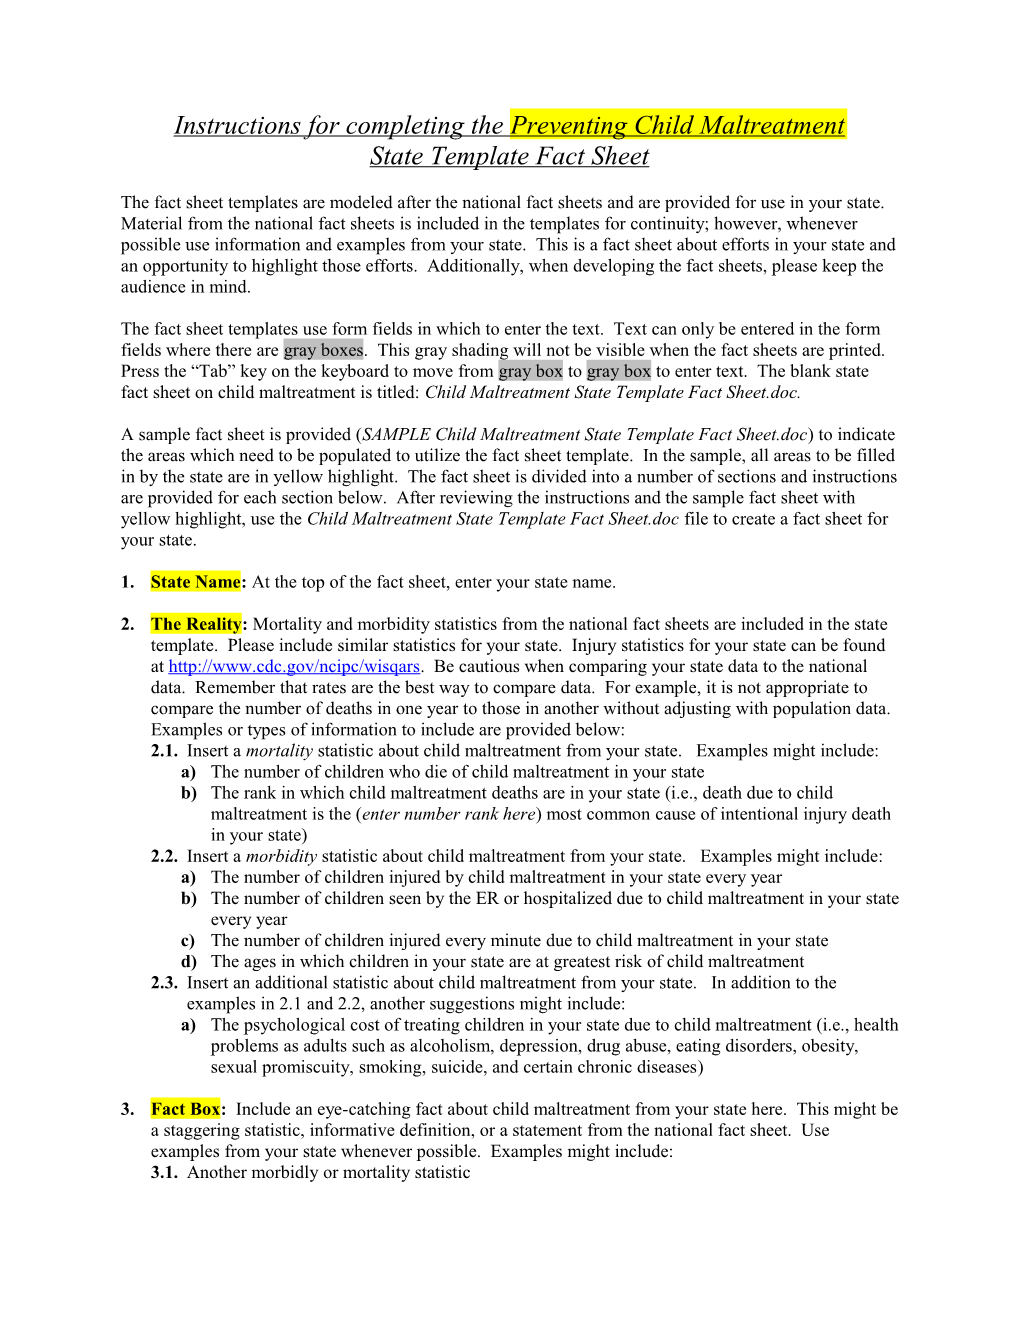 SAMPLE Instructions for Completing the State Template Fact Sheets